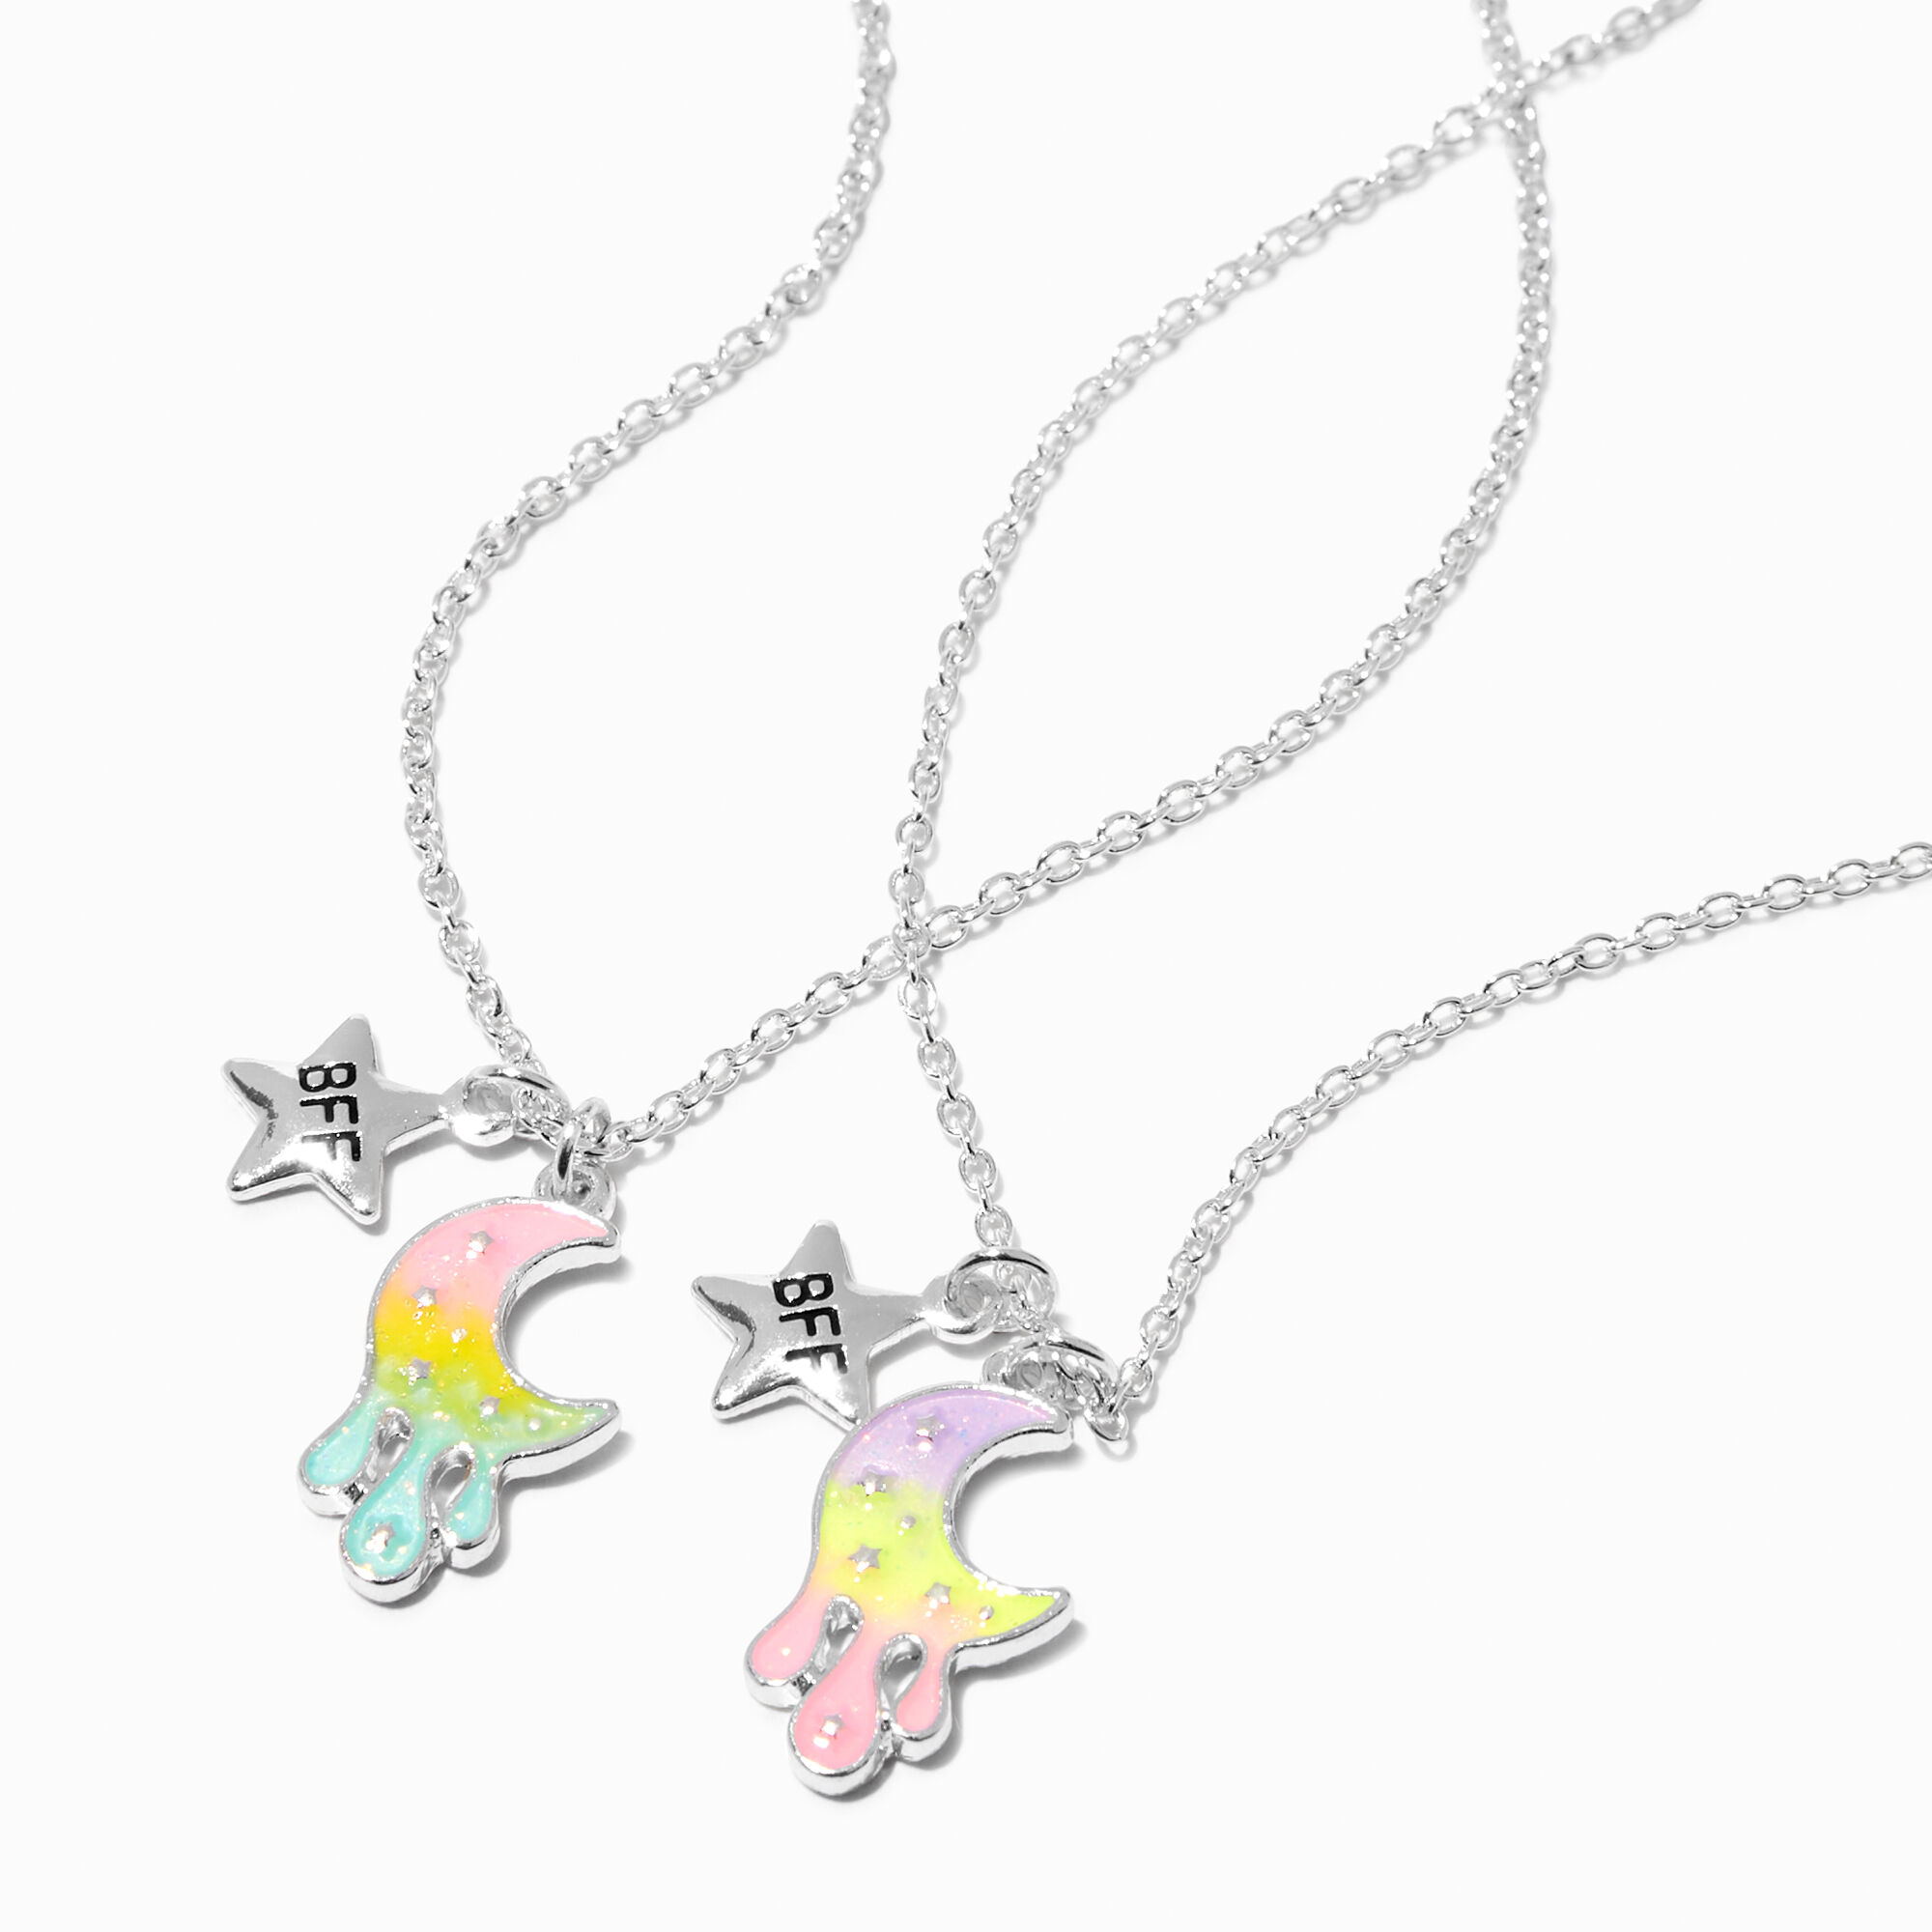 View Claires Best Friends Glow In The Dark Dripping Moon Pendant Necklaces 2 Pack Silver information